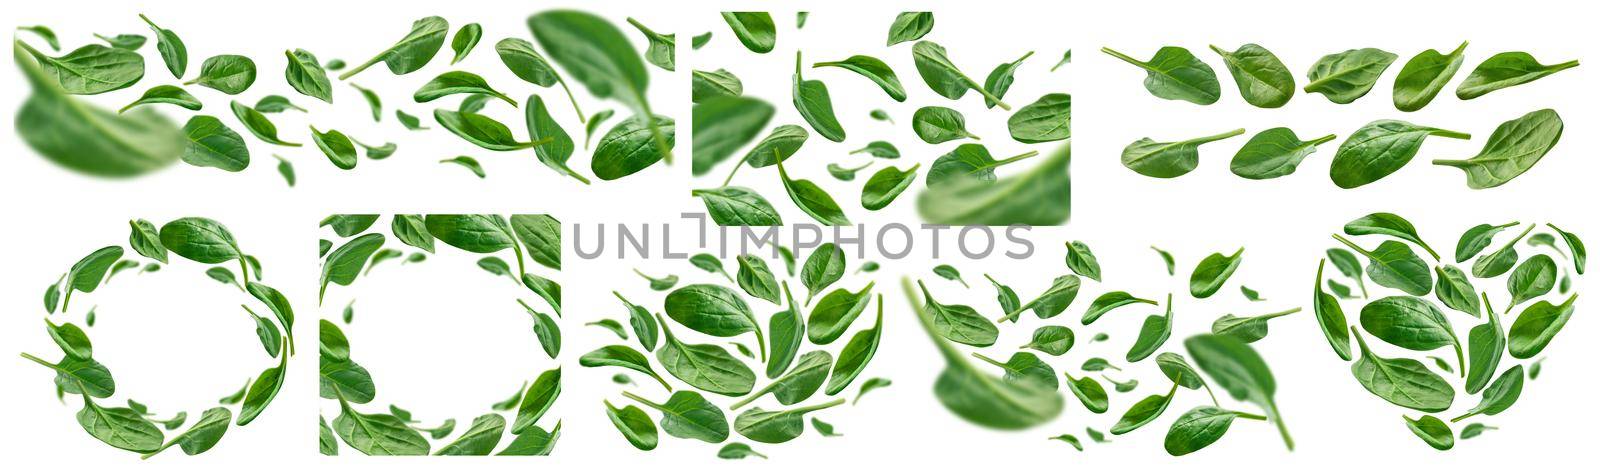 A set of photos. Green spinach leaves levitate on a white background.